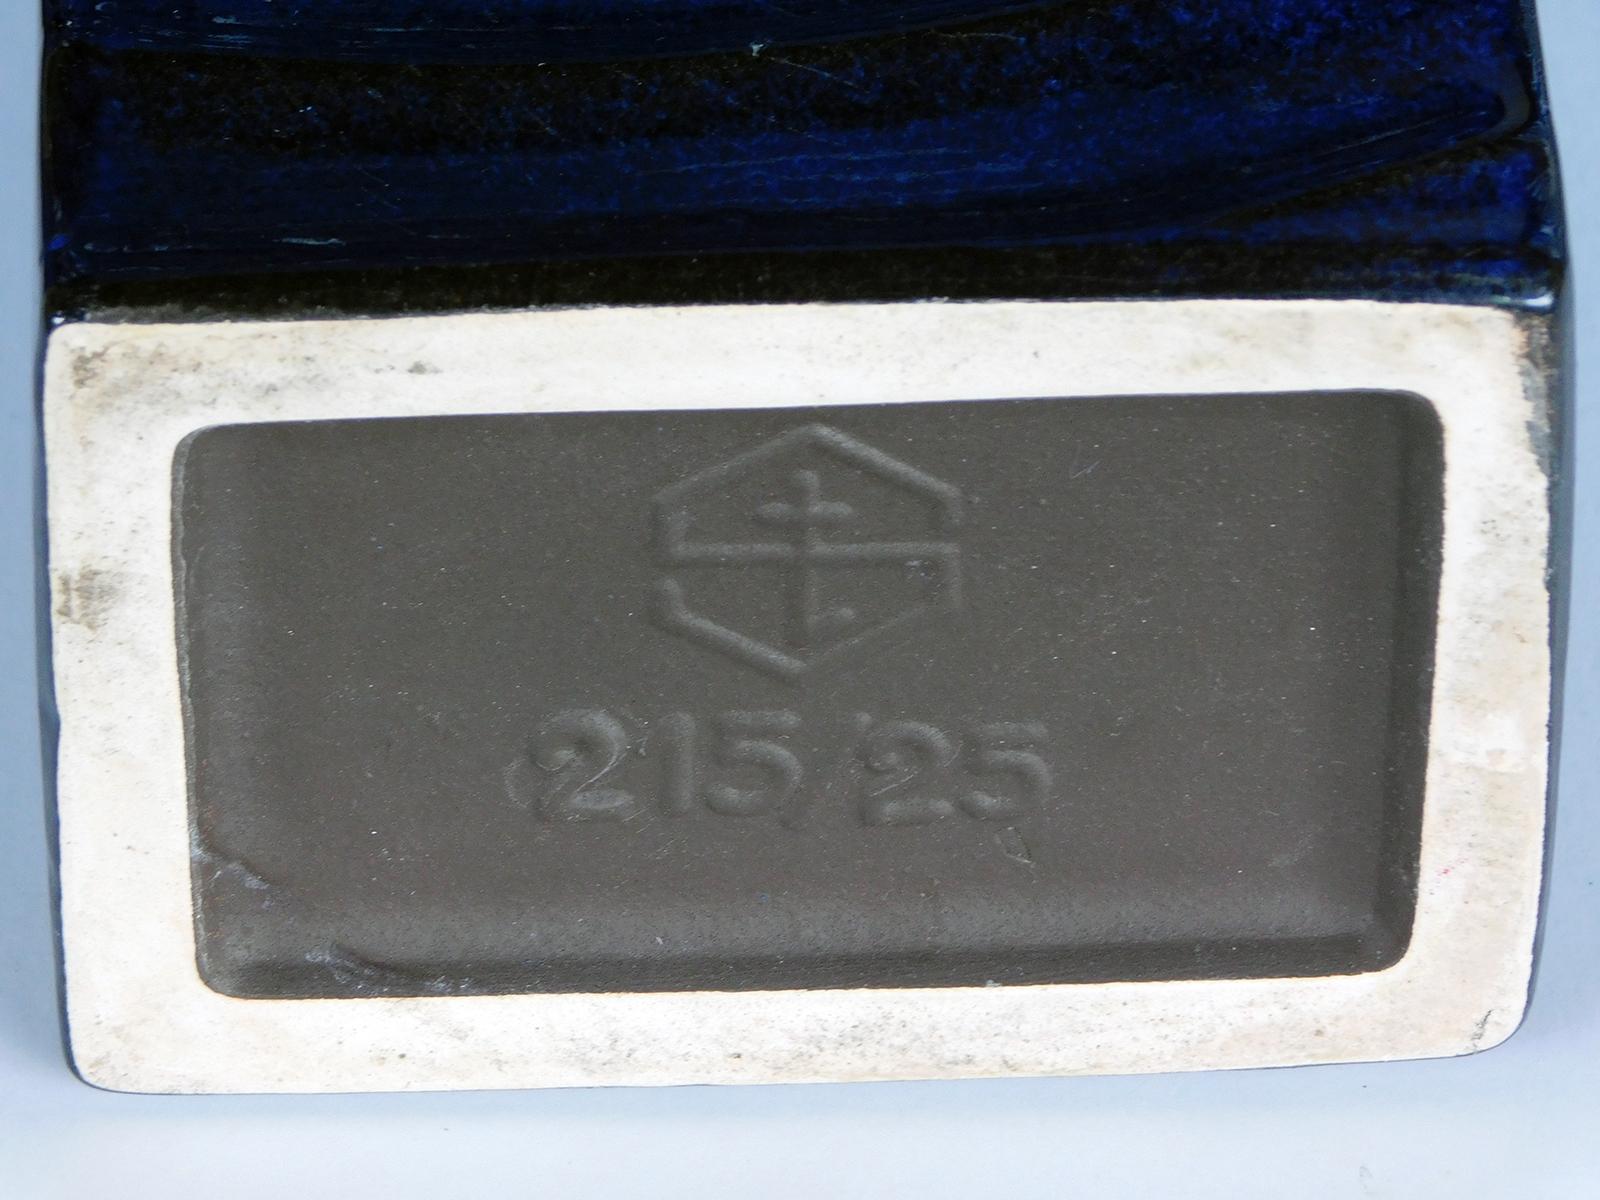 Each of rectangular form with raised offset concentric rings or 'ripples' all in a deep blue on black glaze; STEULER was founded in Höhr-Grenzhausen, a center of the ceramic industry in the Rhineland's Kannenbäckerland, in 1917.  STEULER reached its